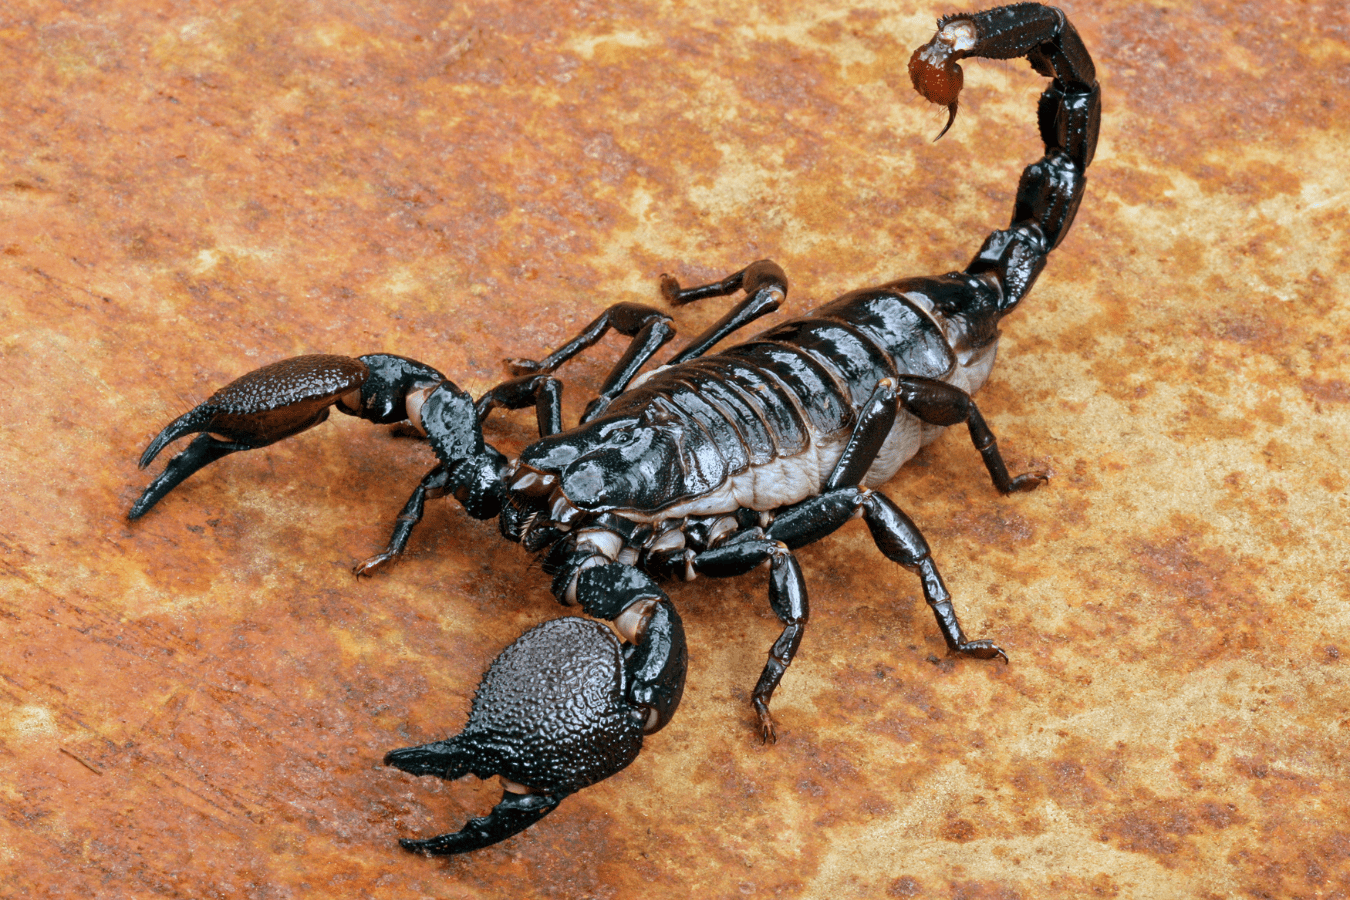 Scorpion Dream Meaning and Symbolism